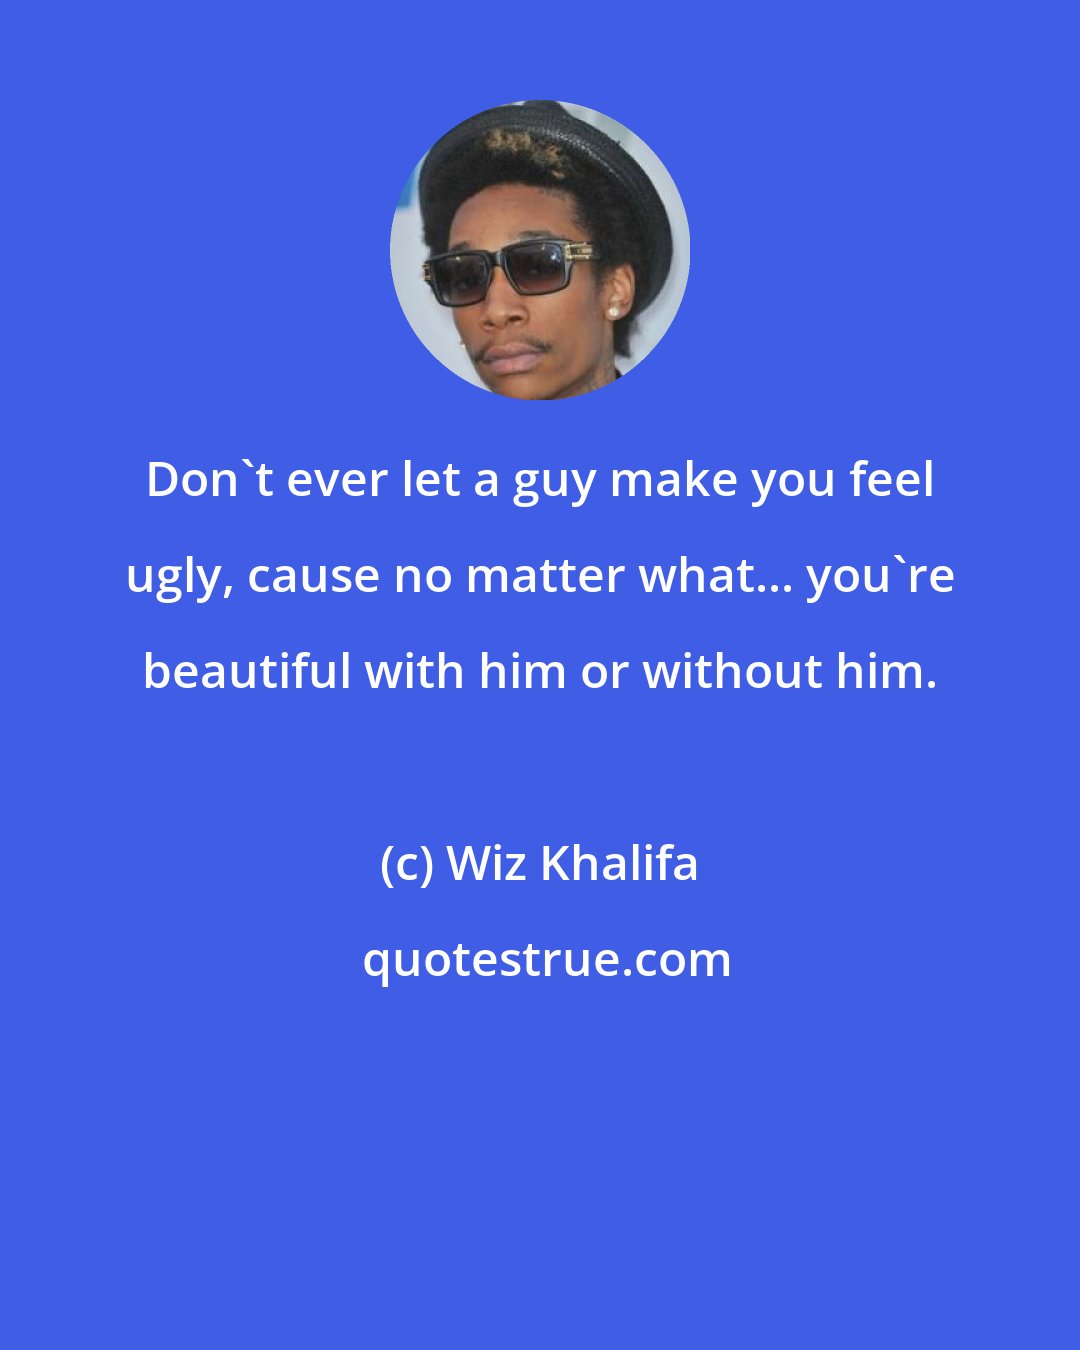 Wiz Khalifa: Don't ever let a guy make you feel ugly, cause no matter what... you're beautiful with him or without him.